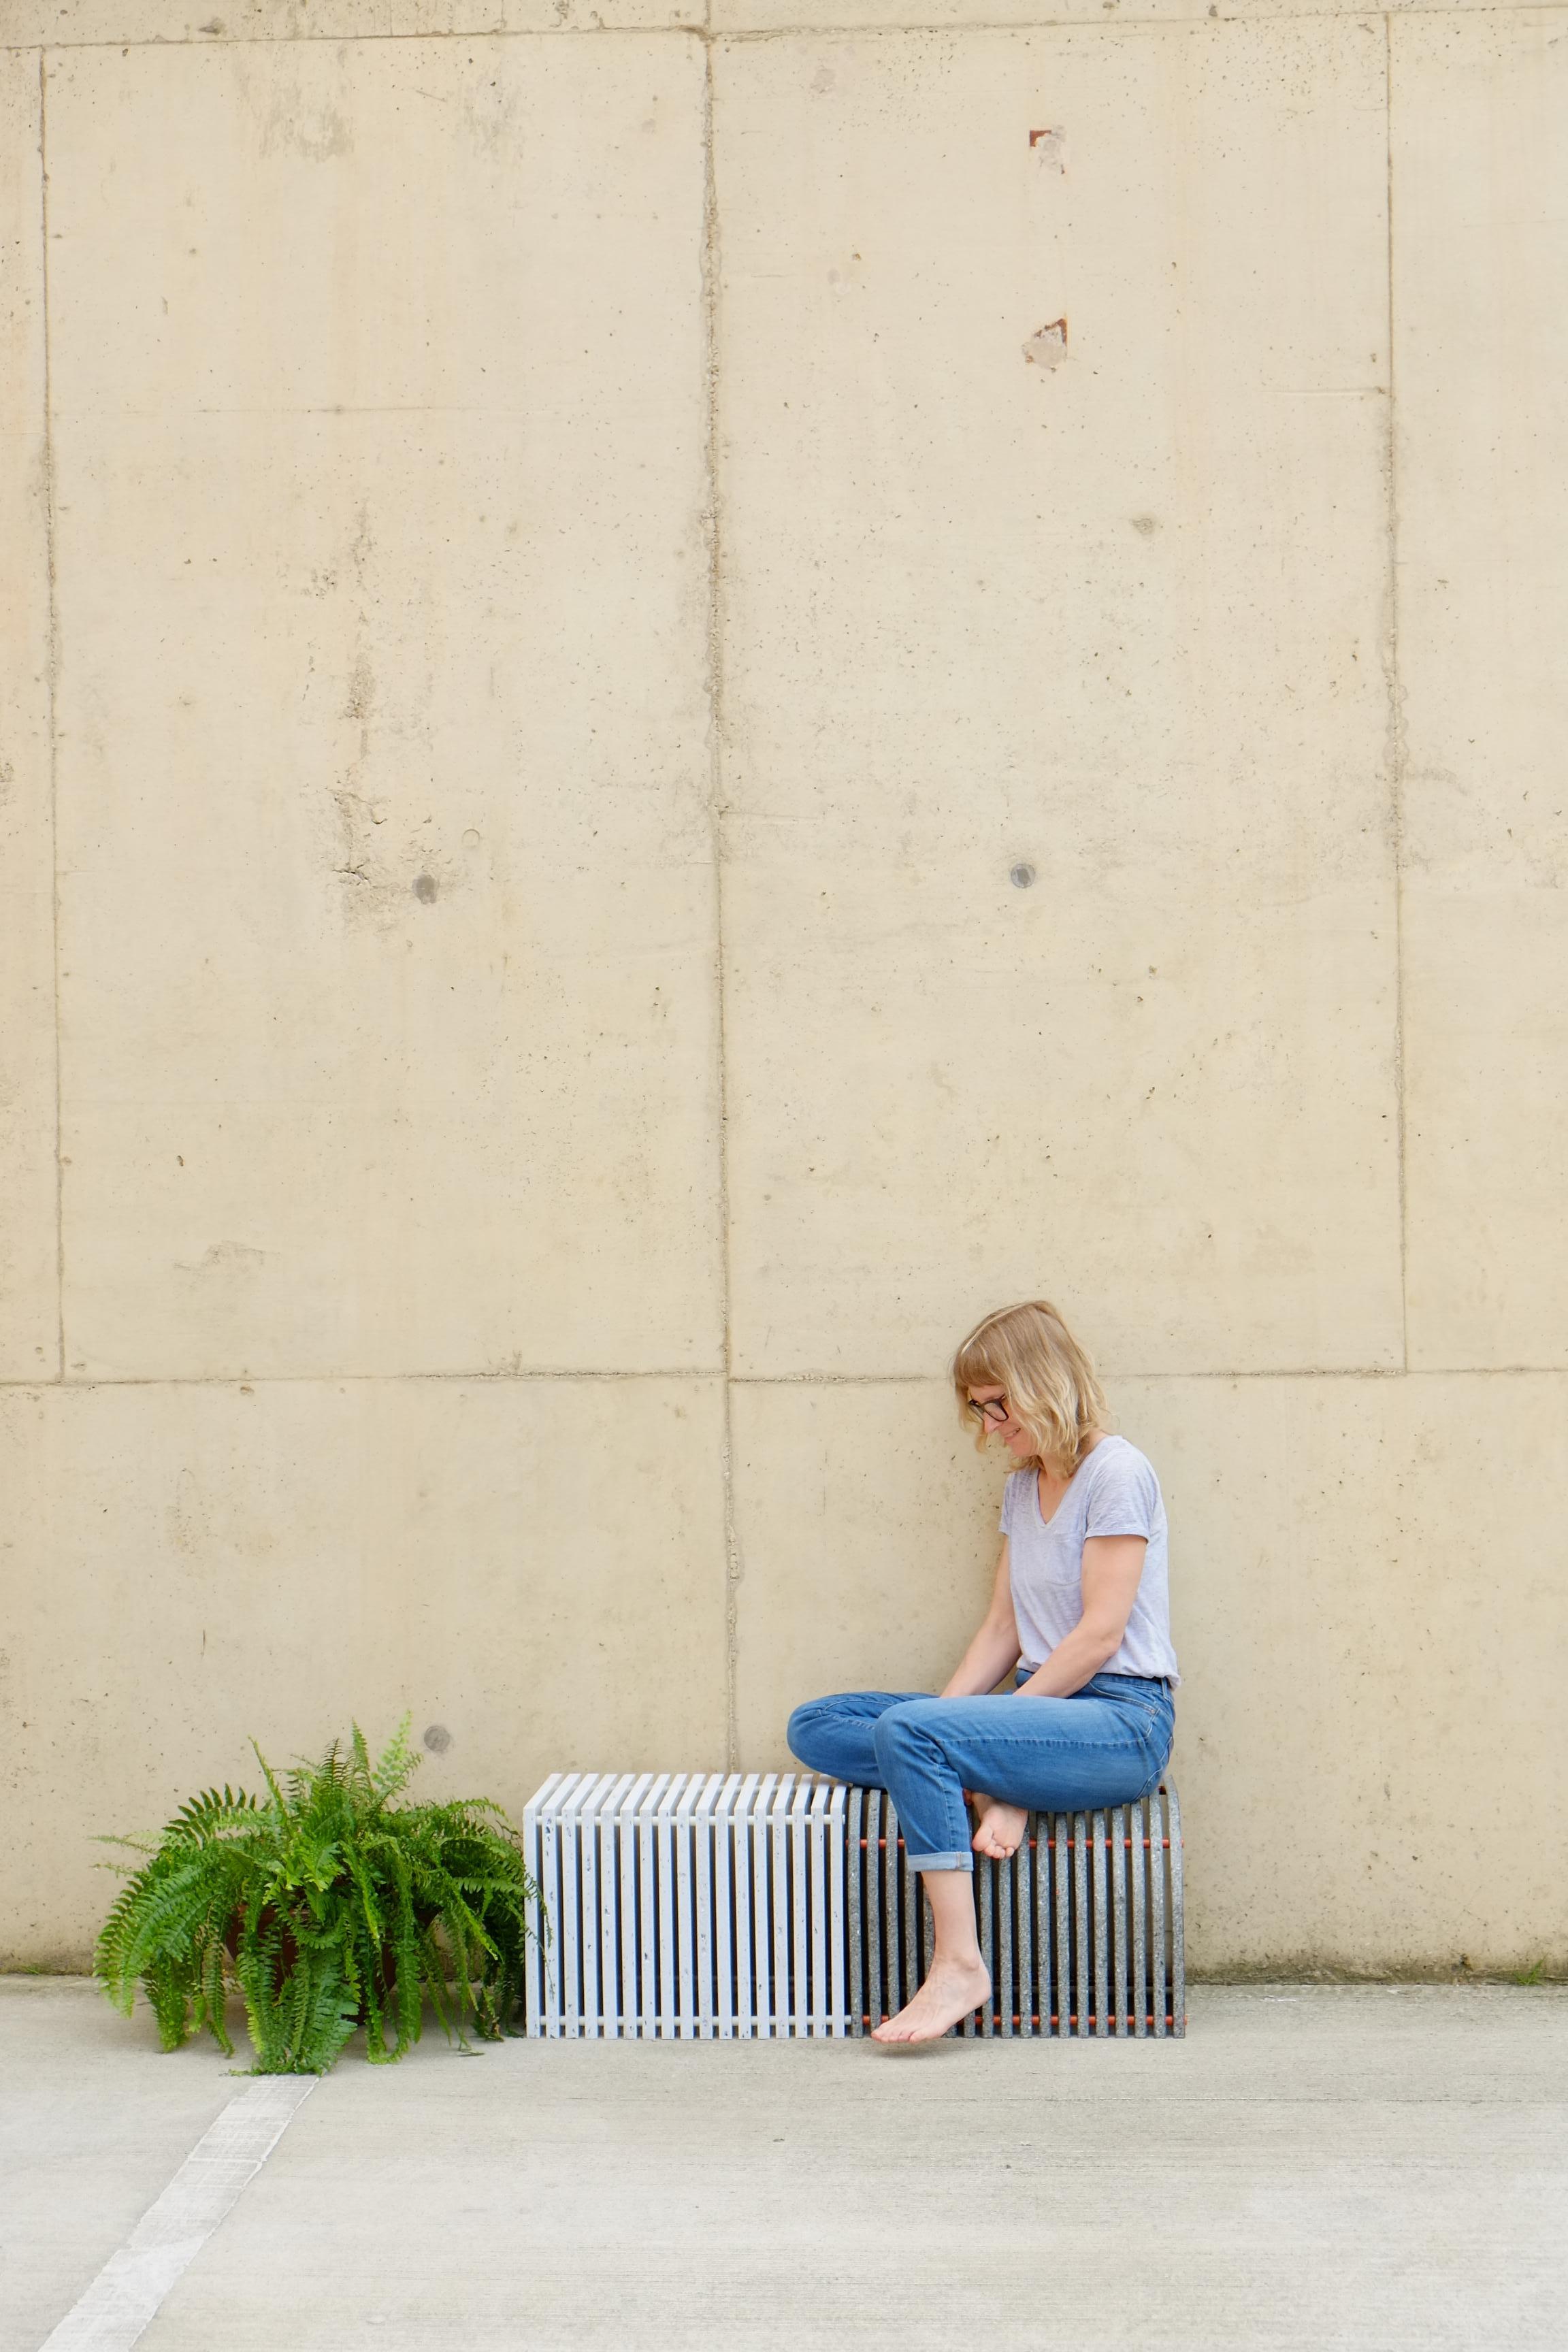 Jää - a Finnish word for both ice and ‘please stay’.

The inspiration for this bench / seating came from the beautiful and practical nature of recycled plastic and its environmentally friendly credentials. The white color of this material made us